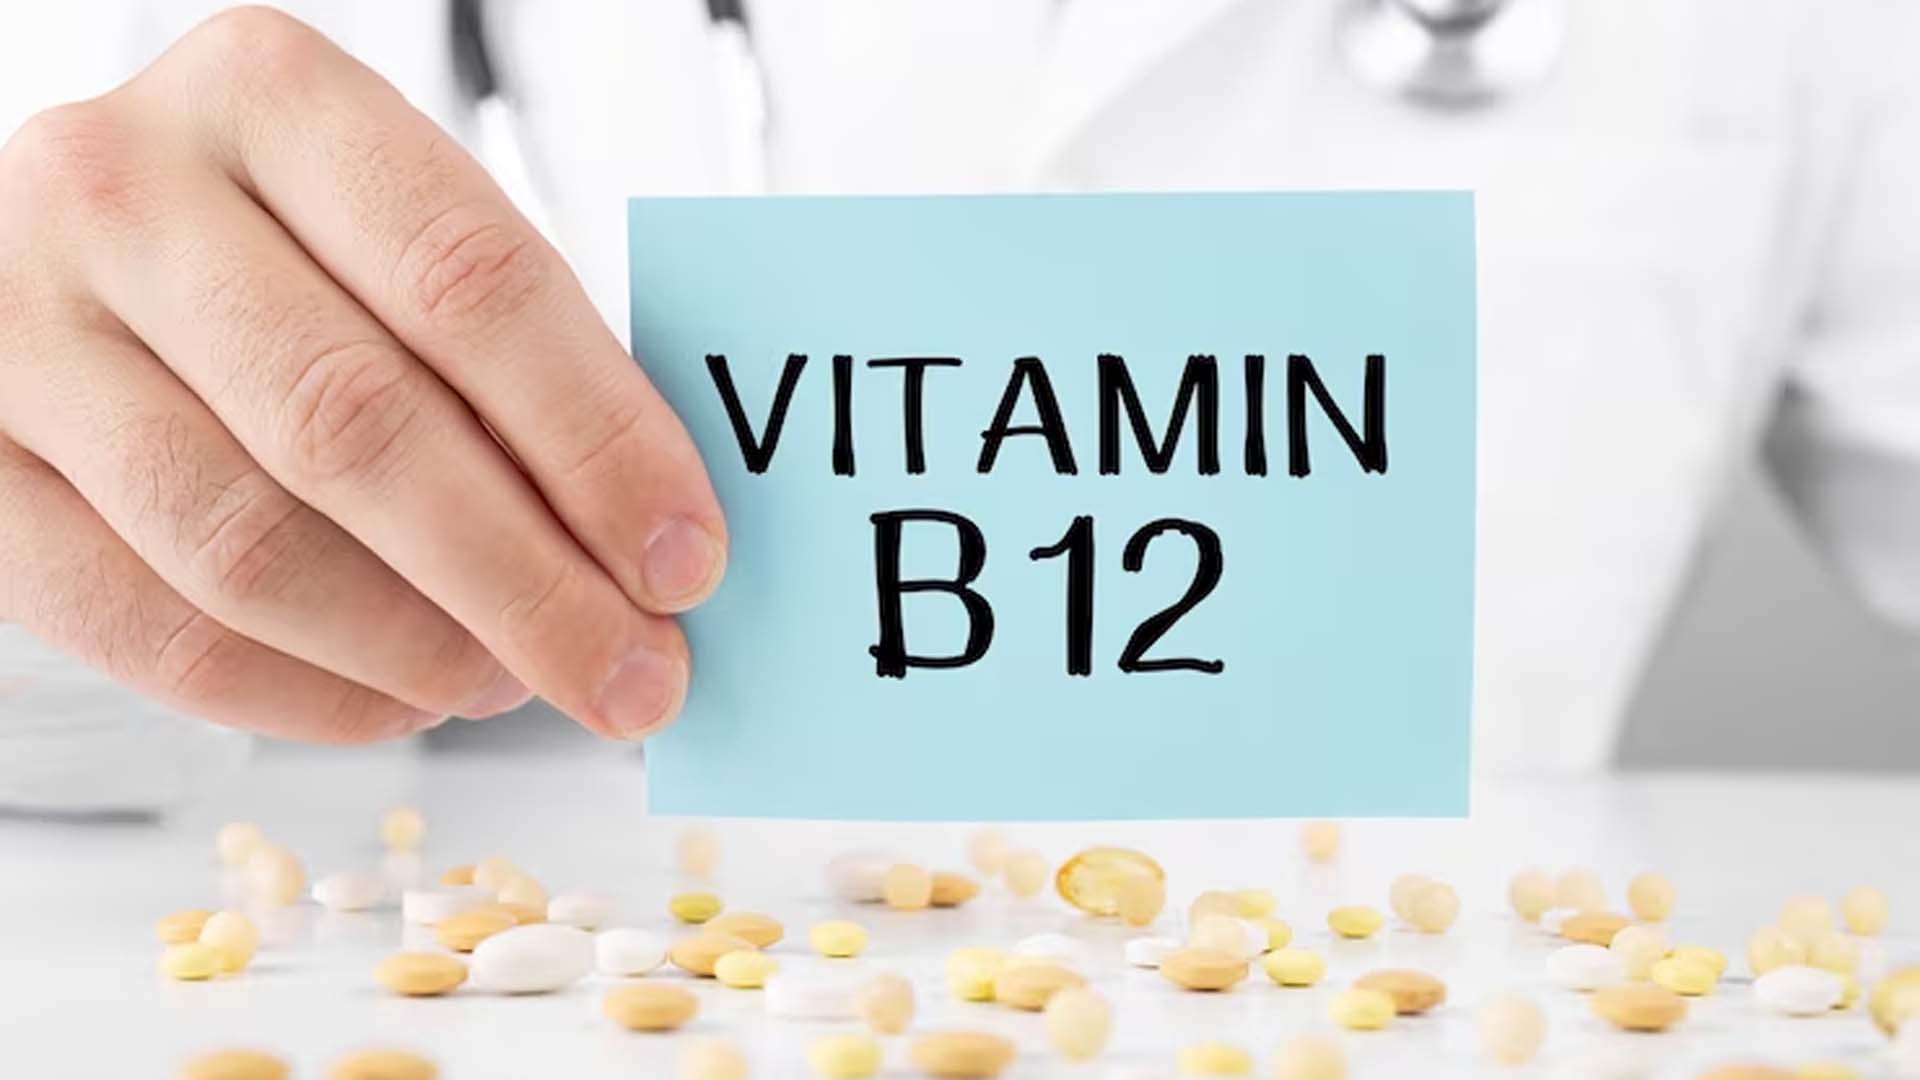 Does B12 Deficiency Cause Hair Loss?